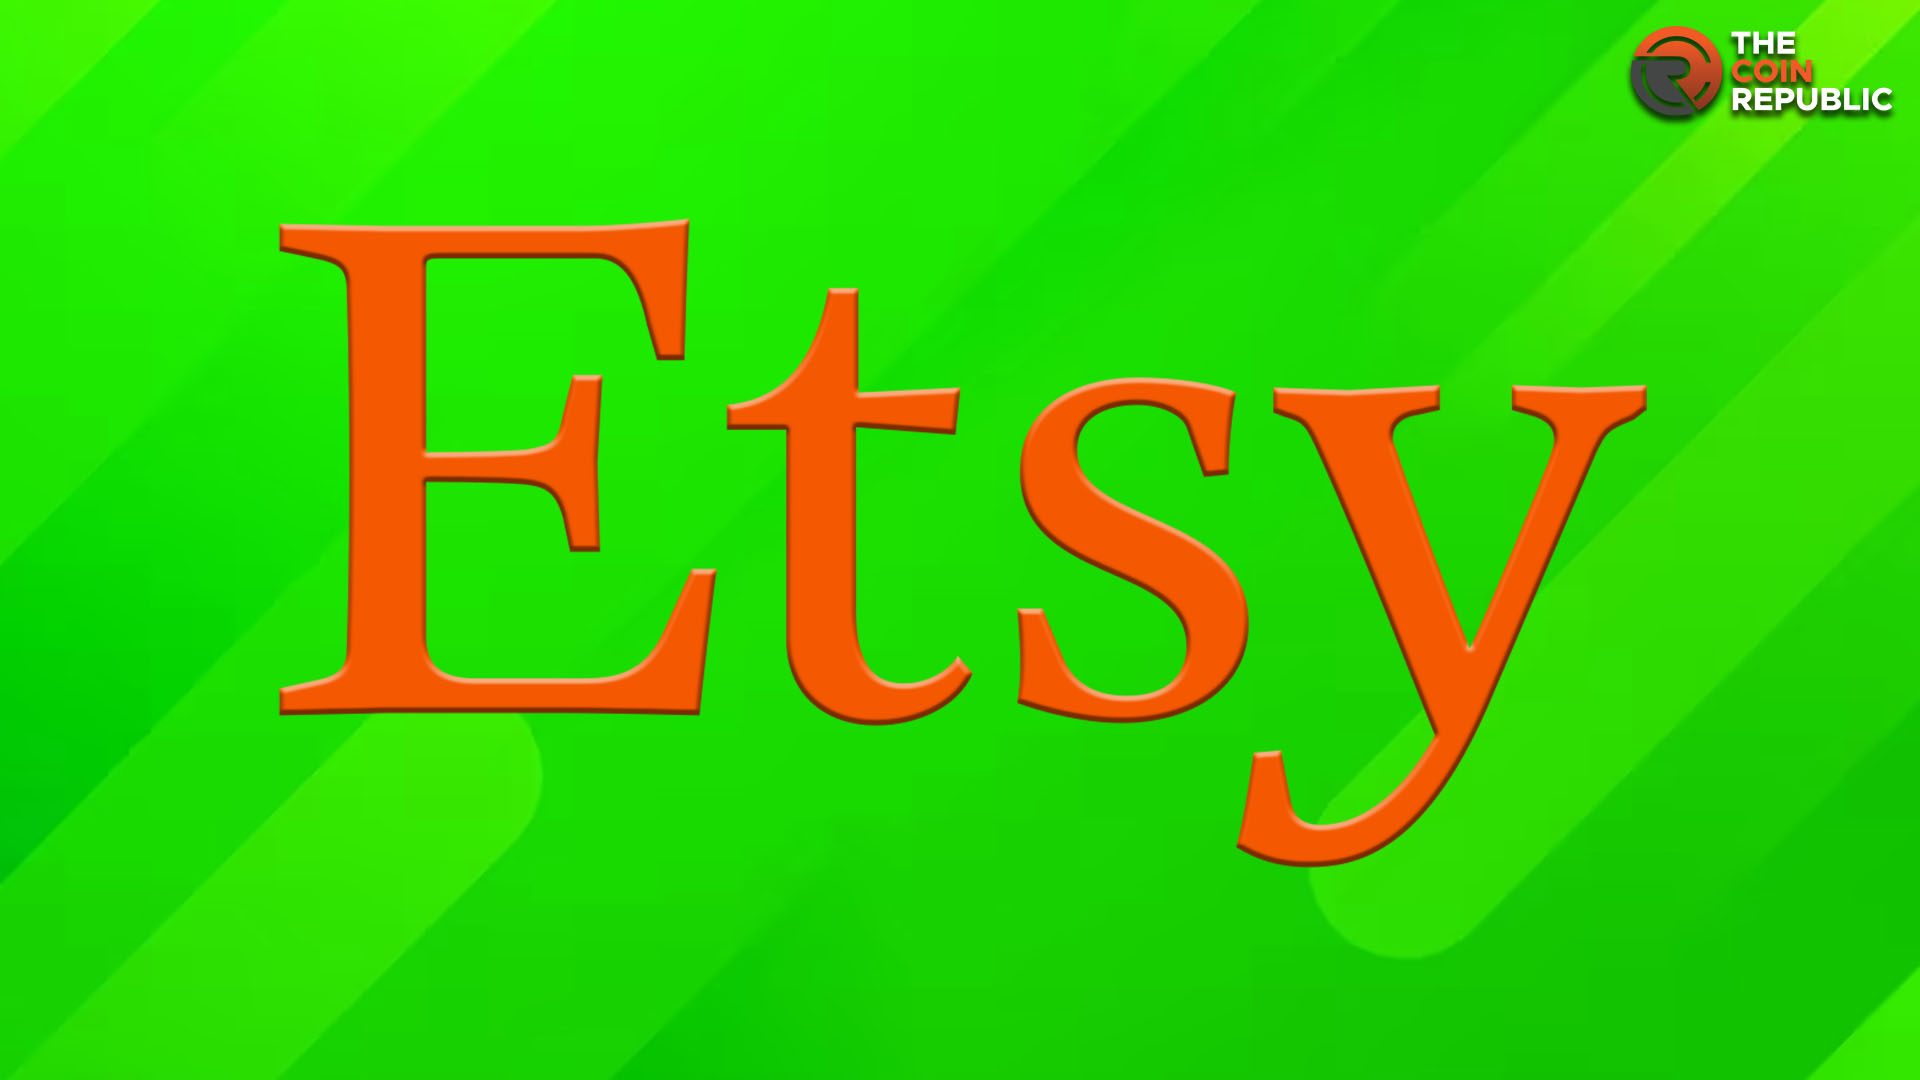 ETSY Stock Price Surges 8%; Q3 Earnings Reversed the Trend?